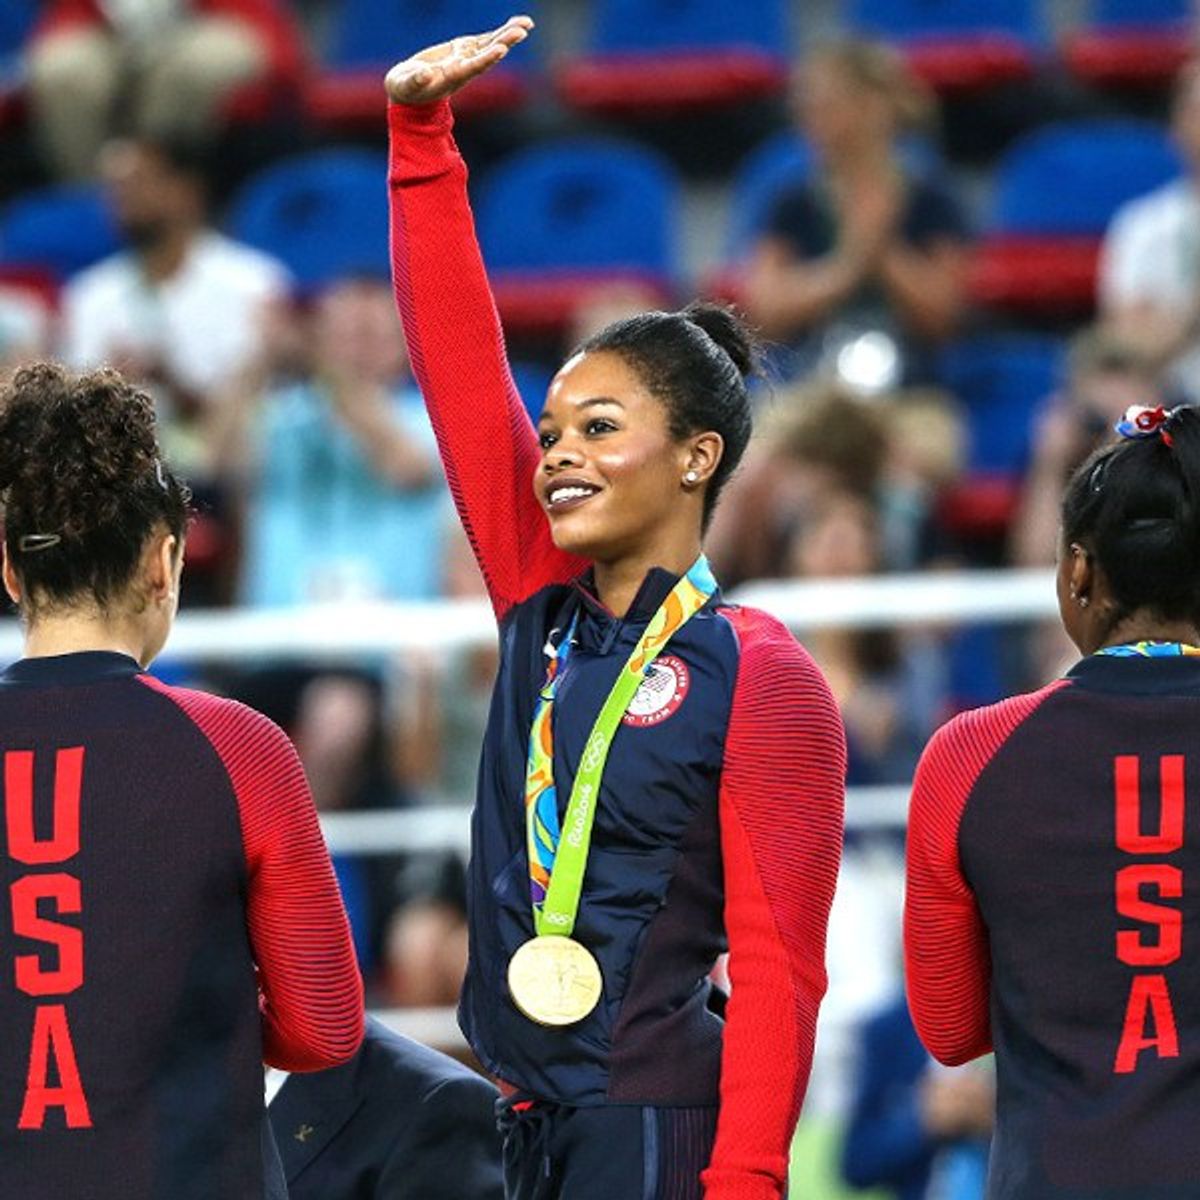 Going for Gold: How To Survive Your Freshman Year In College Like An Olympian